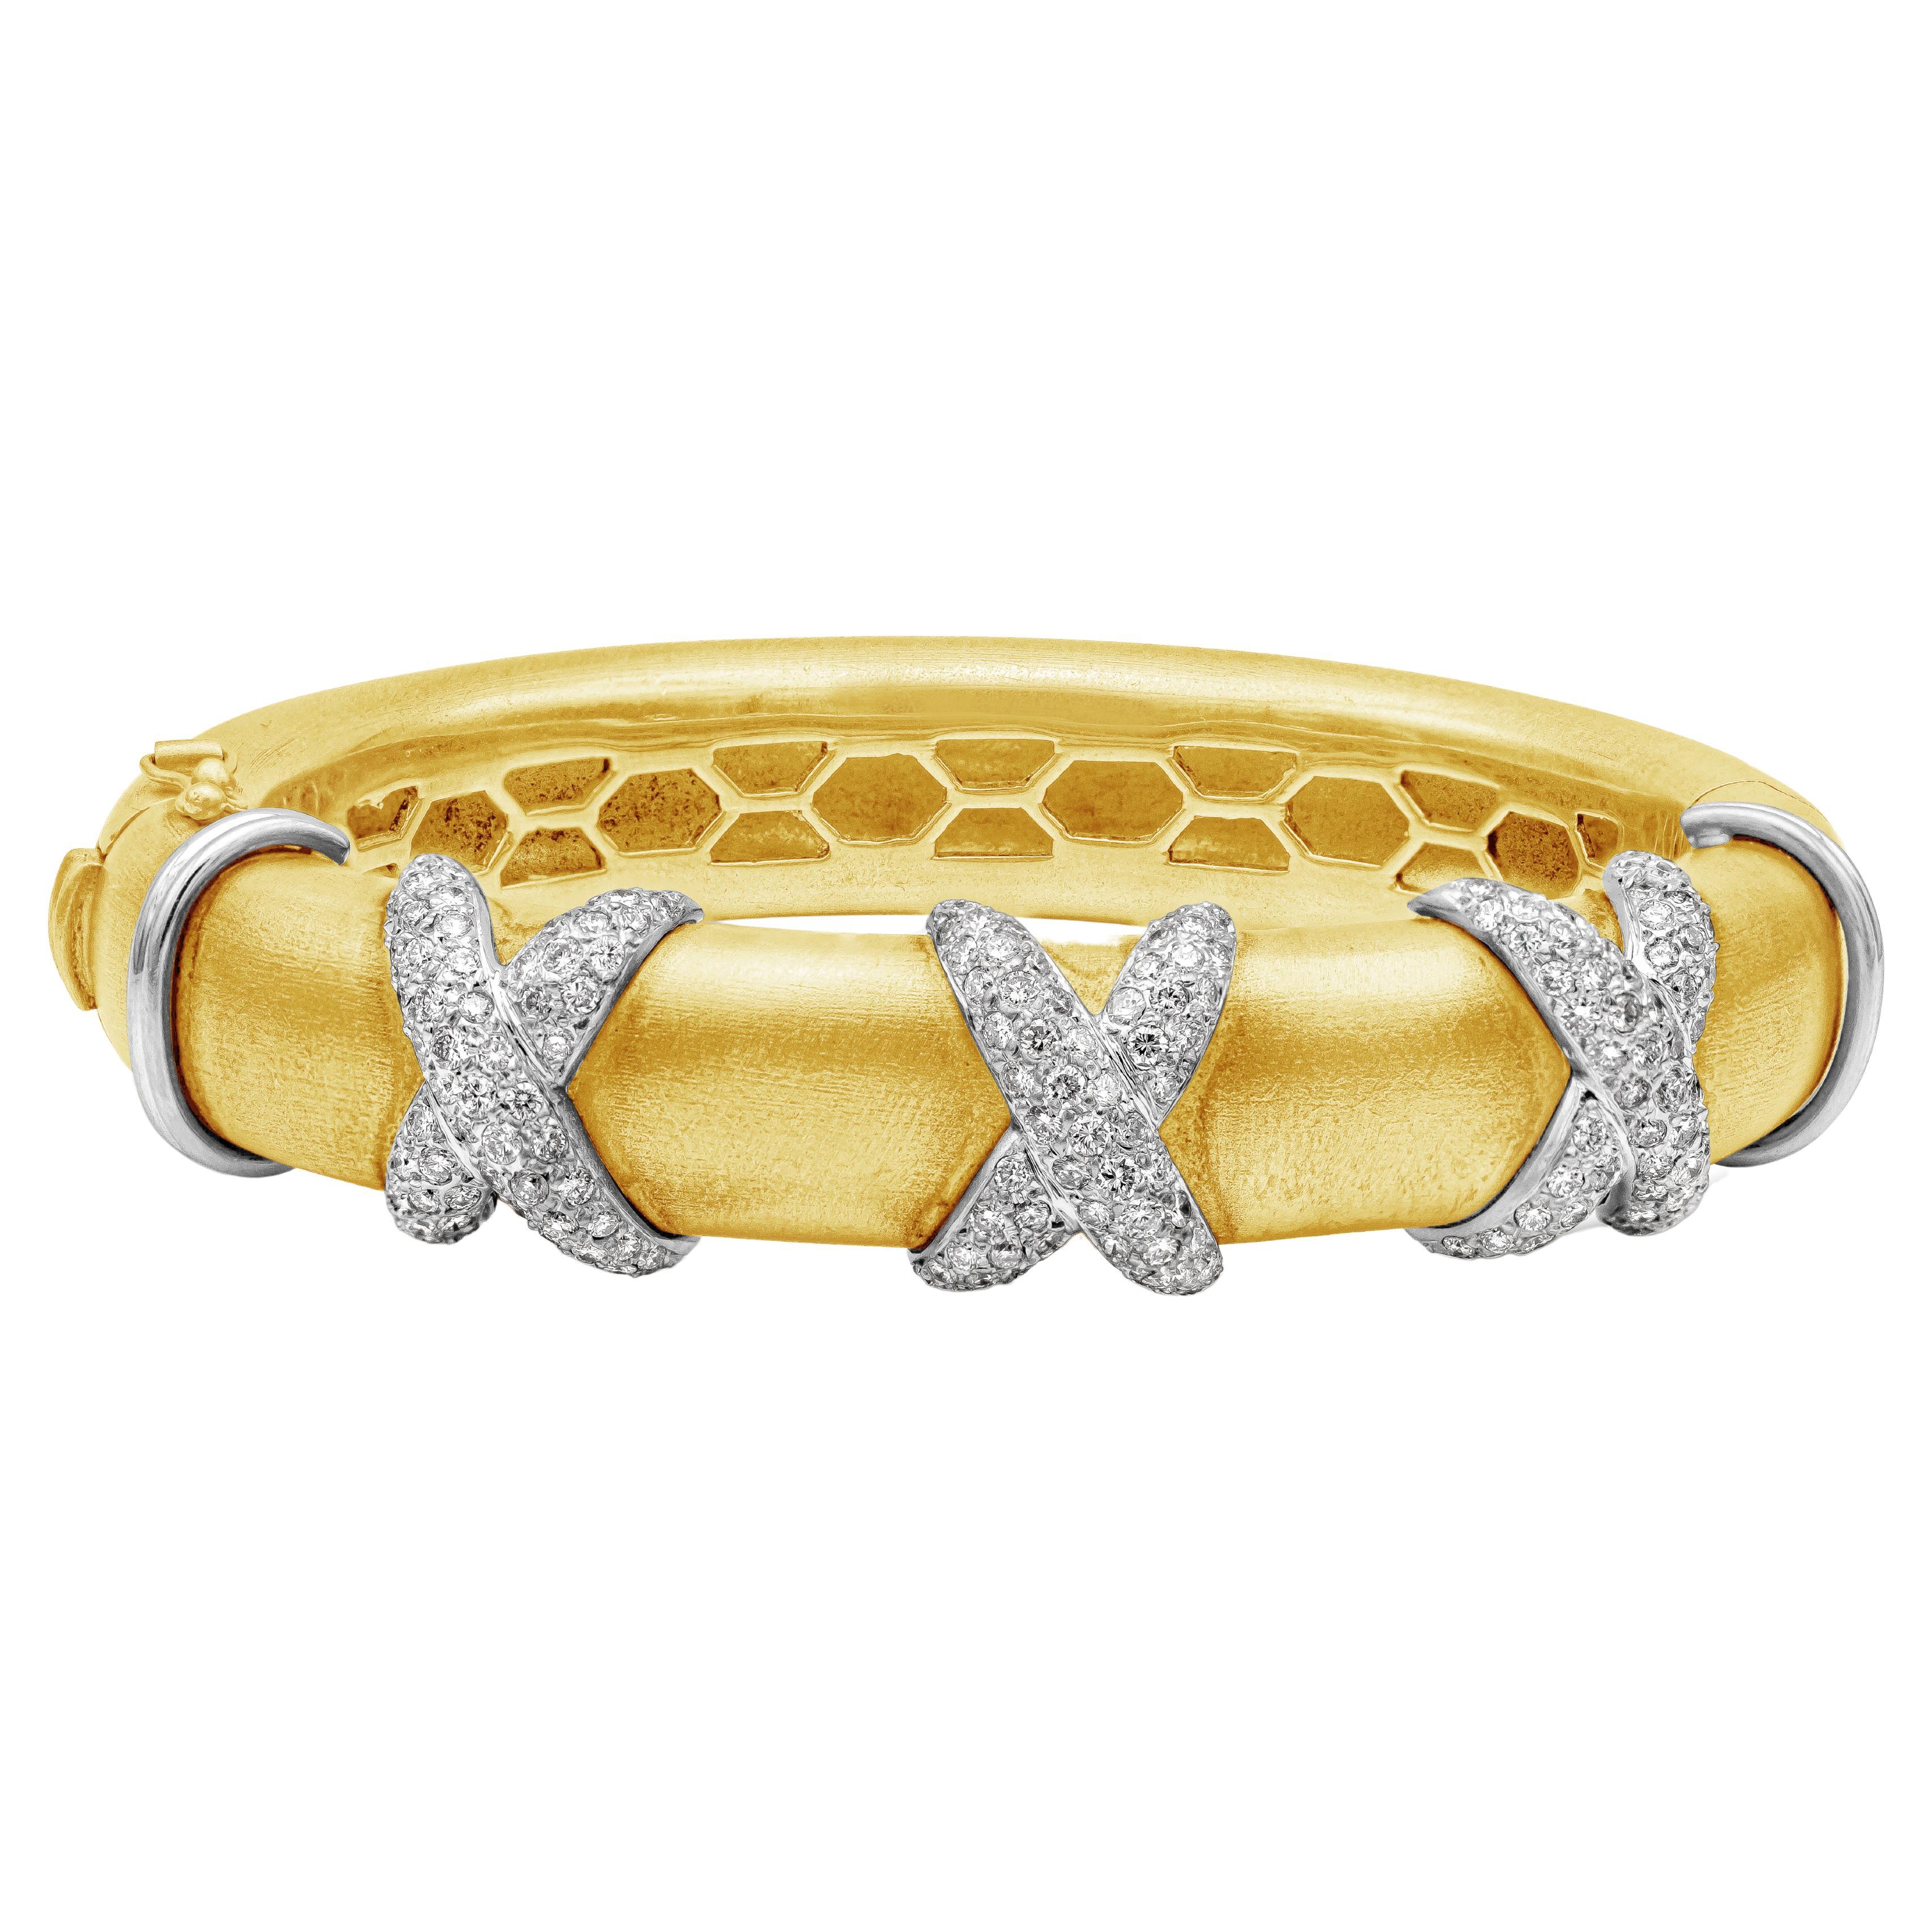 Triple Cross Diamond Thick Bangle Bracelet in White Gold & Yellow Gold For Sale